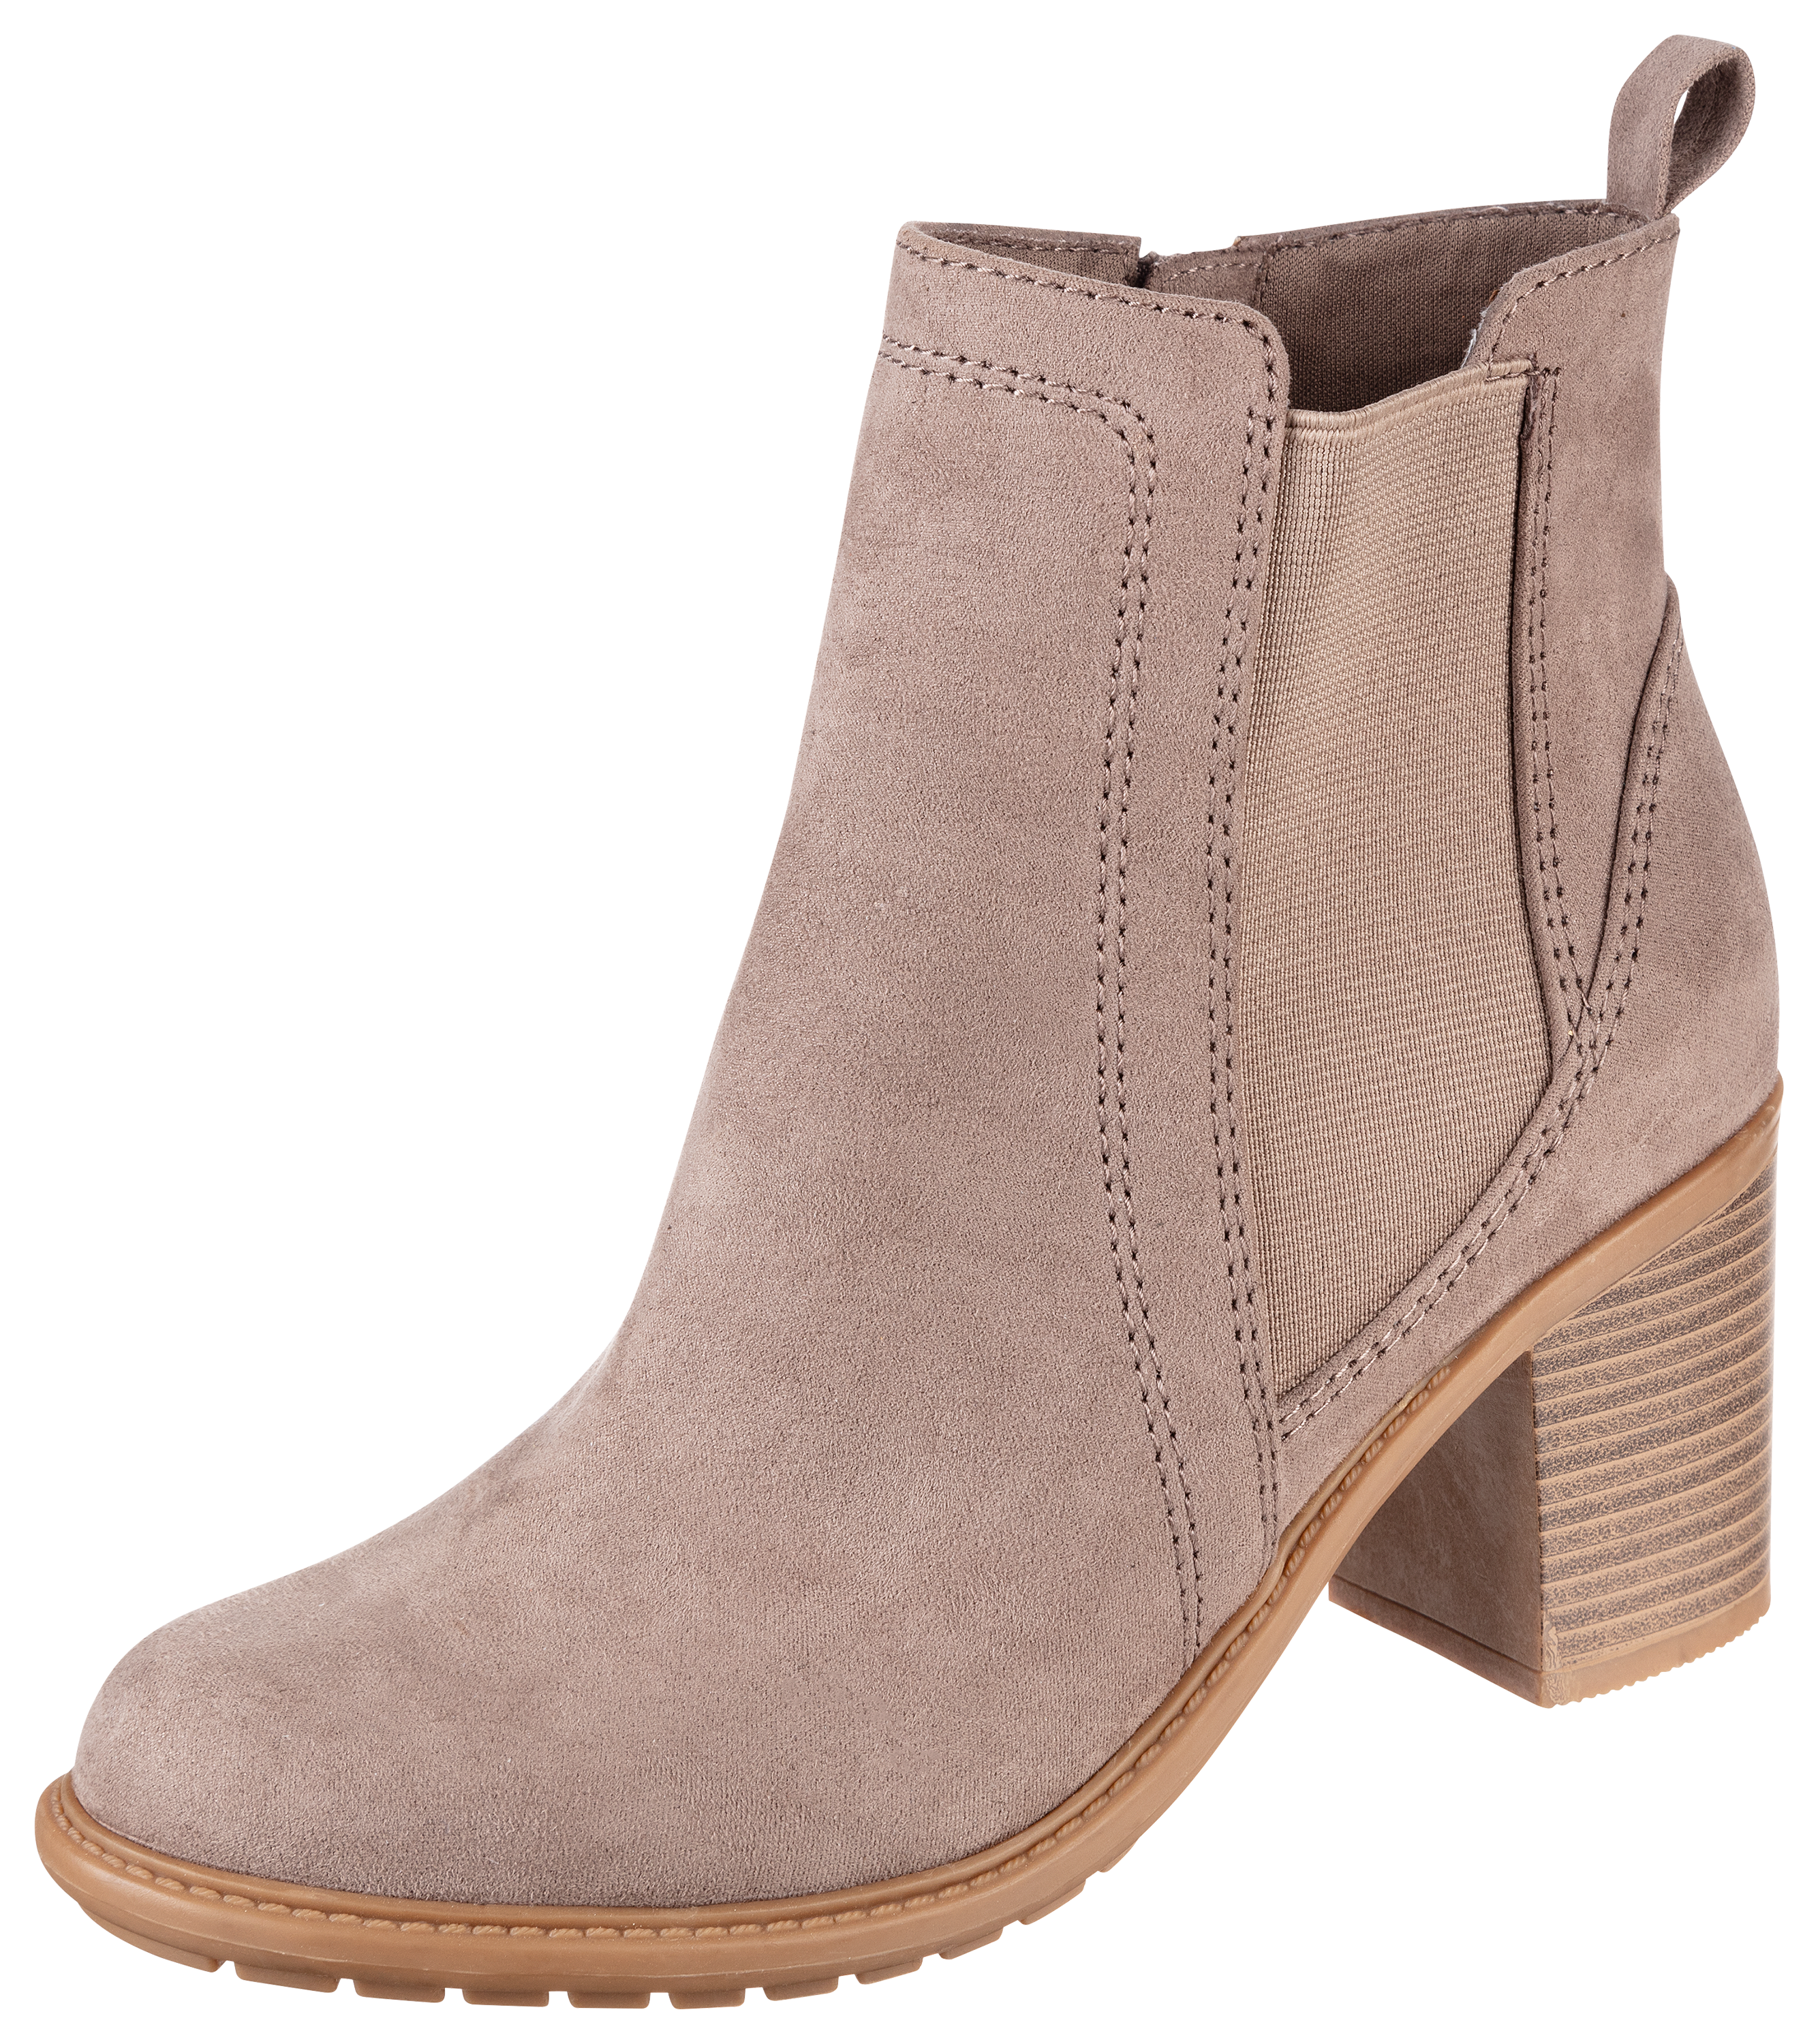 Natural Reflections Natalie II Boots for Ladies - Taupe - 6M